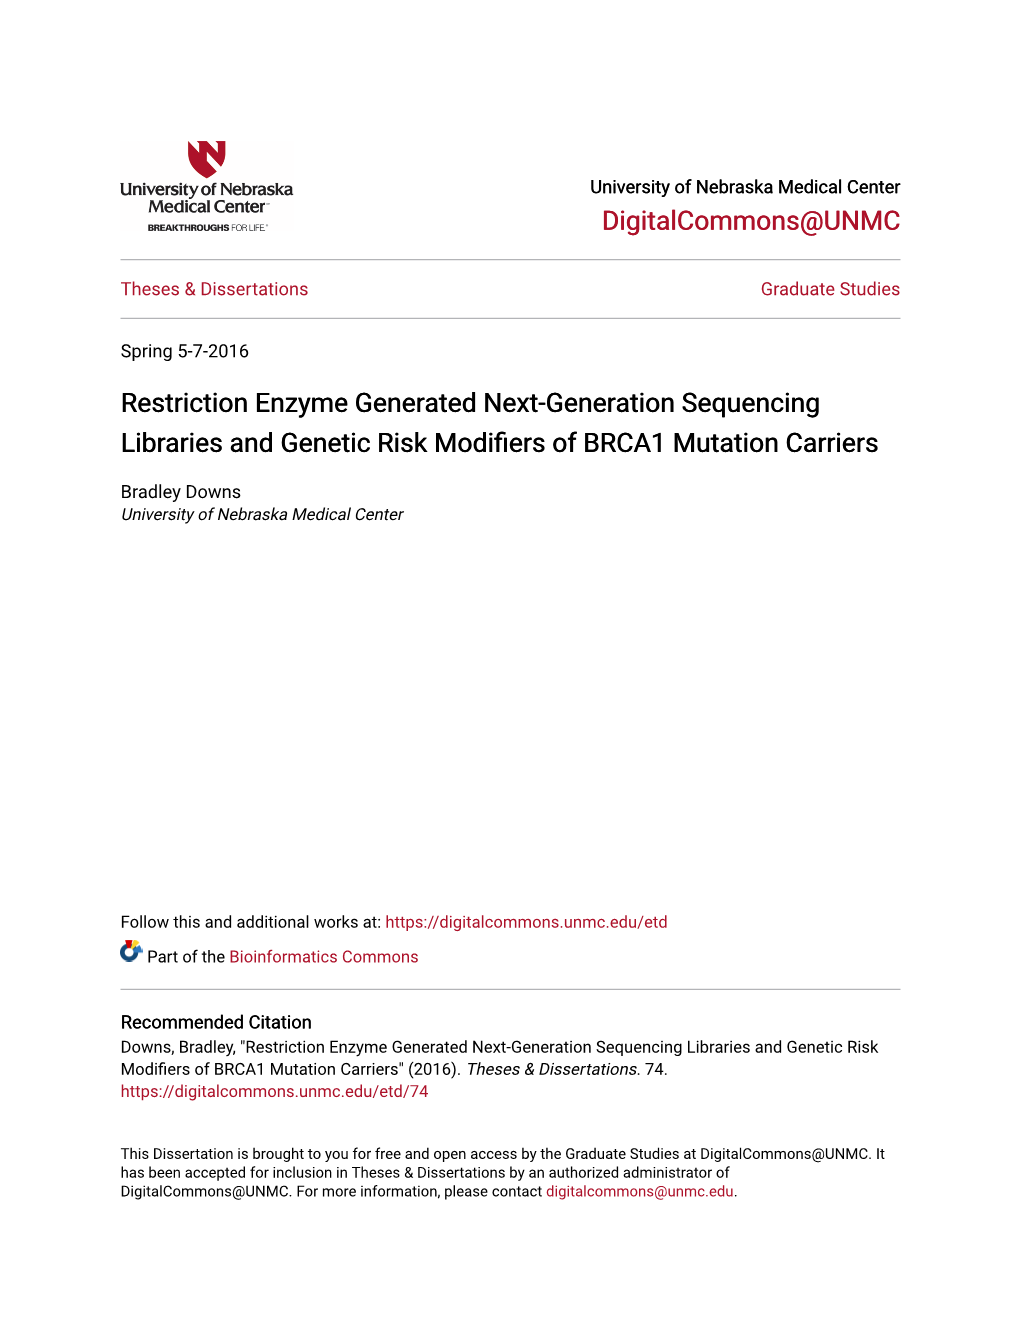 Restriction Enzyme Generated Next-Generation Sequencing Libraries and Genetic Risk Modifiers of BRCA1 Mutation Carriers